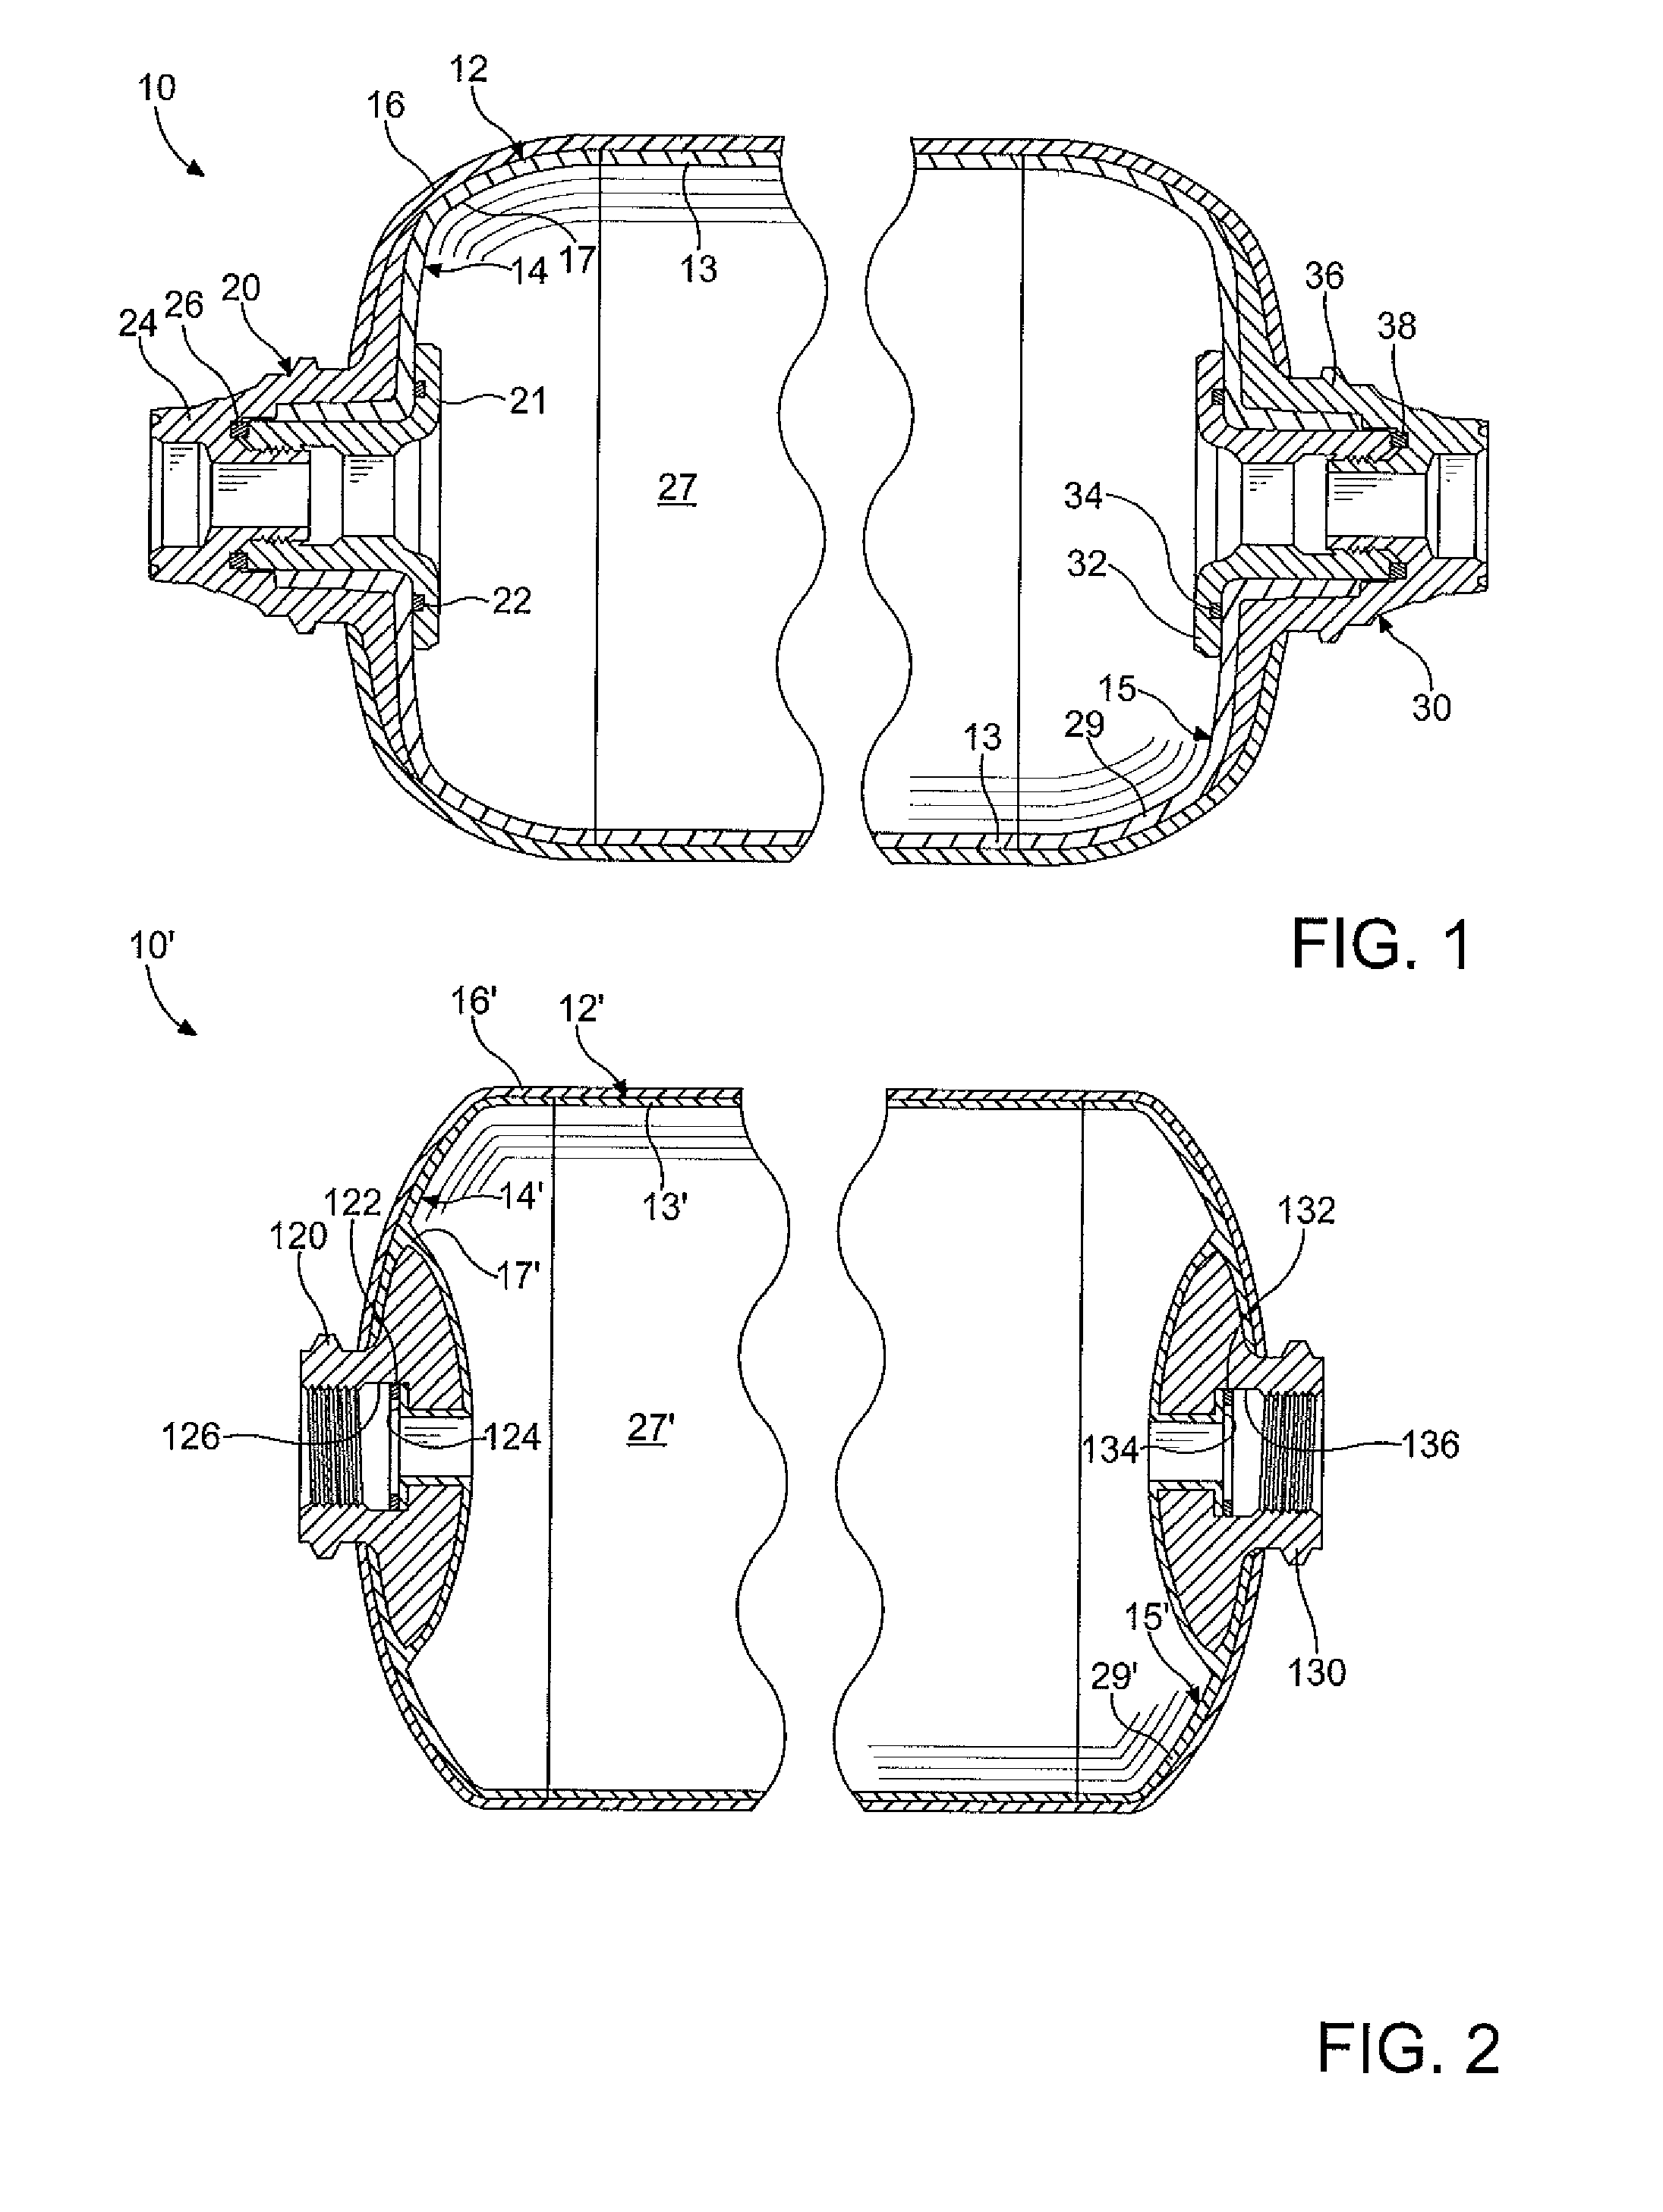 Process for forming a vessel